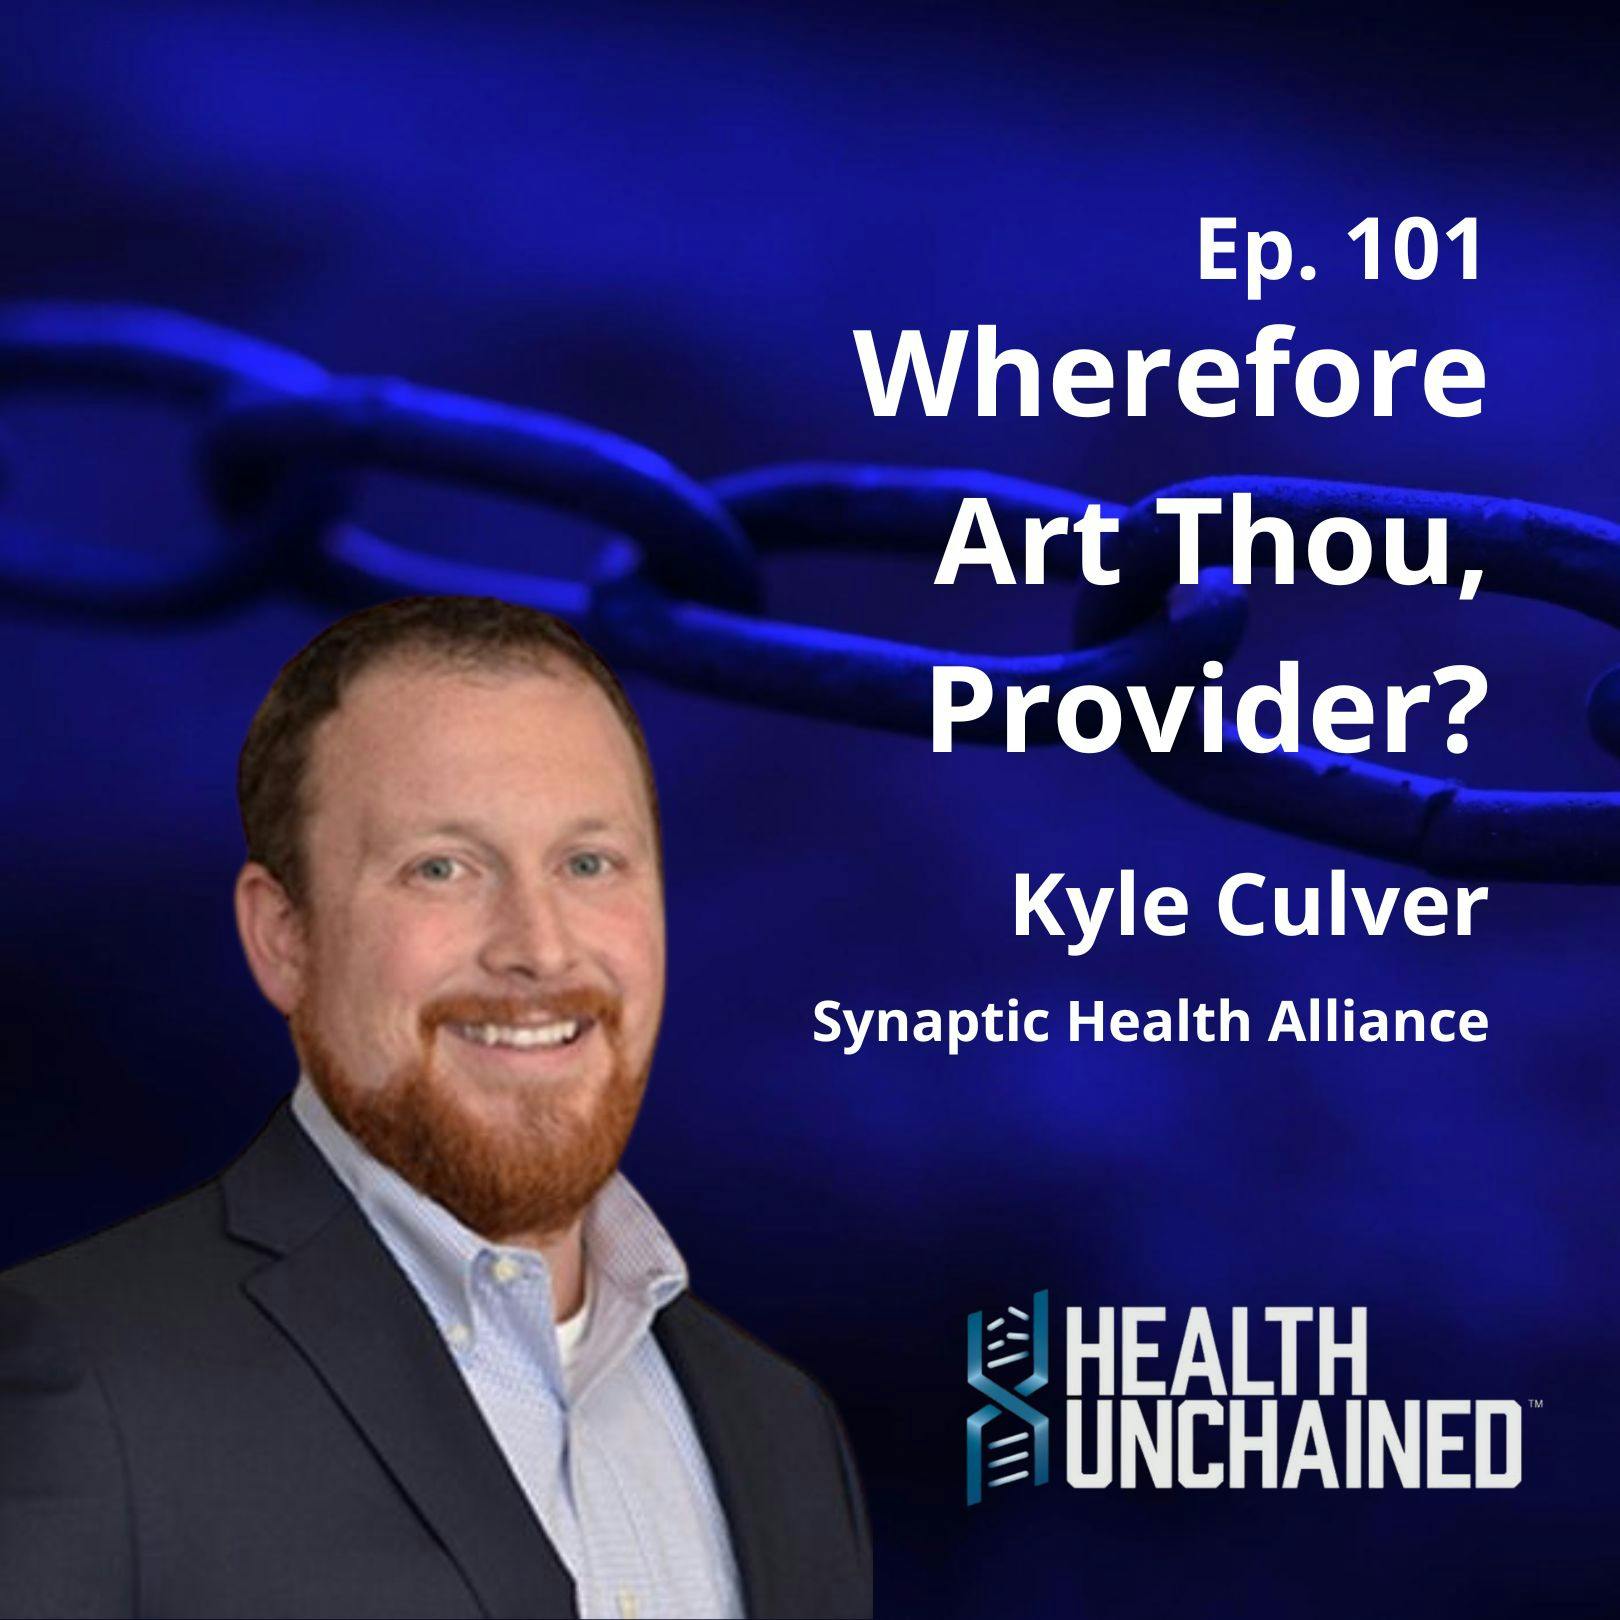 Ep. 101: Wherefore Art Thou, Provider? with Kyle Culver of Synaptic Health Alliance